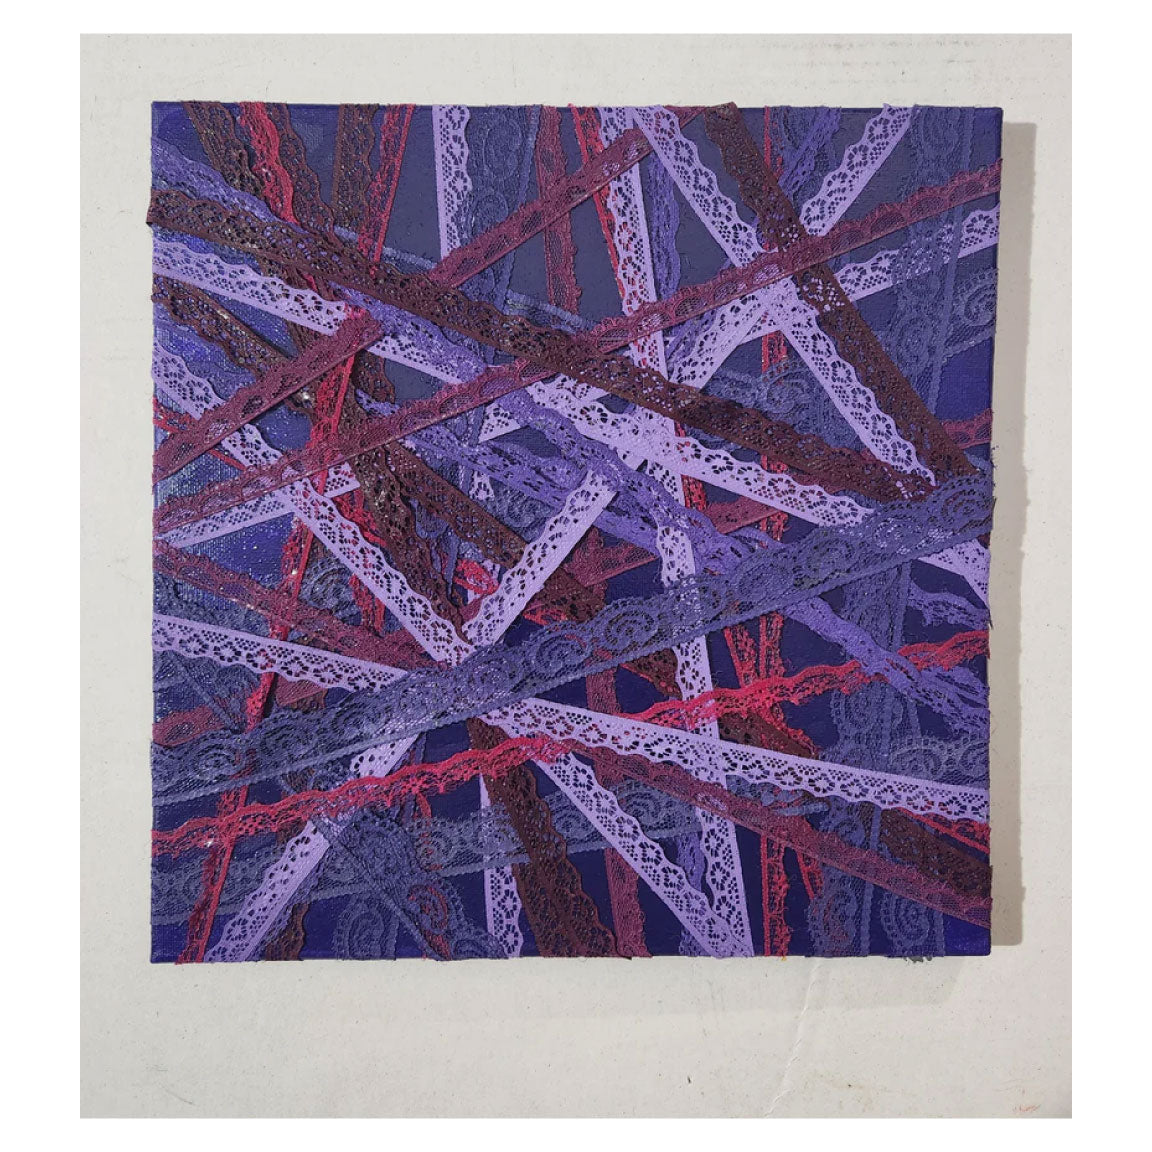 'PURPLE WEBS' Acrylic, Lace, and Mixed Media on Canvas